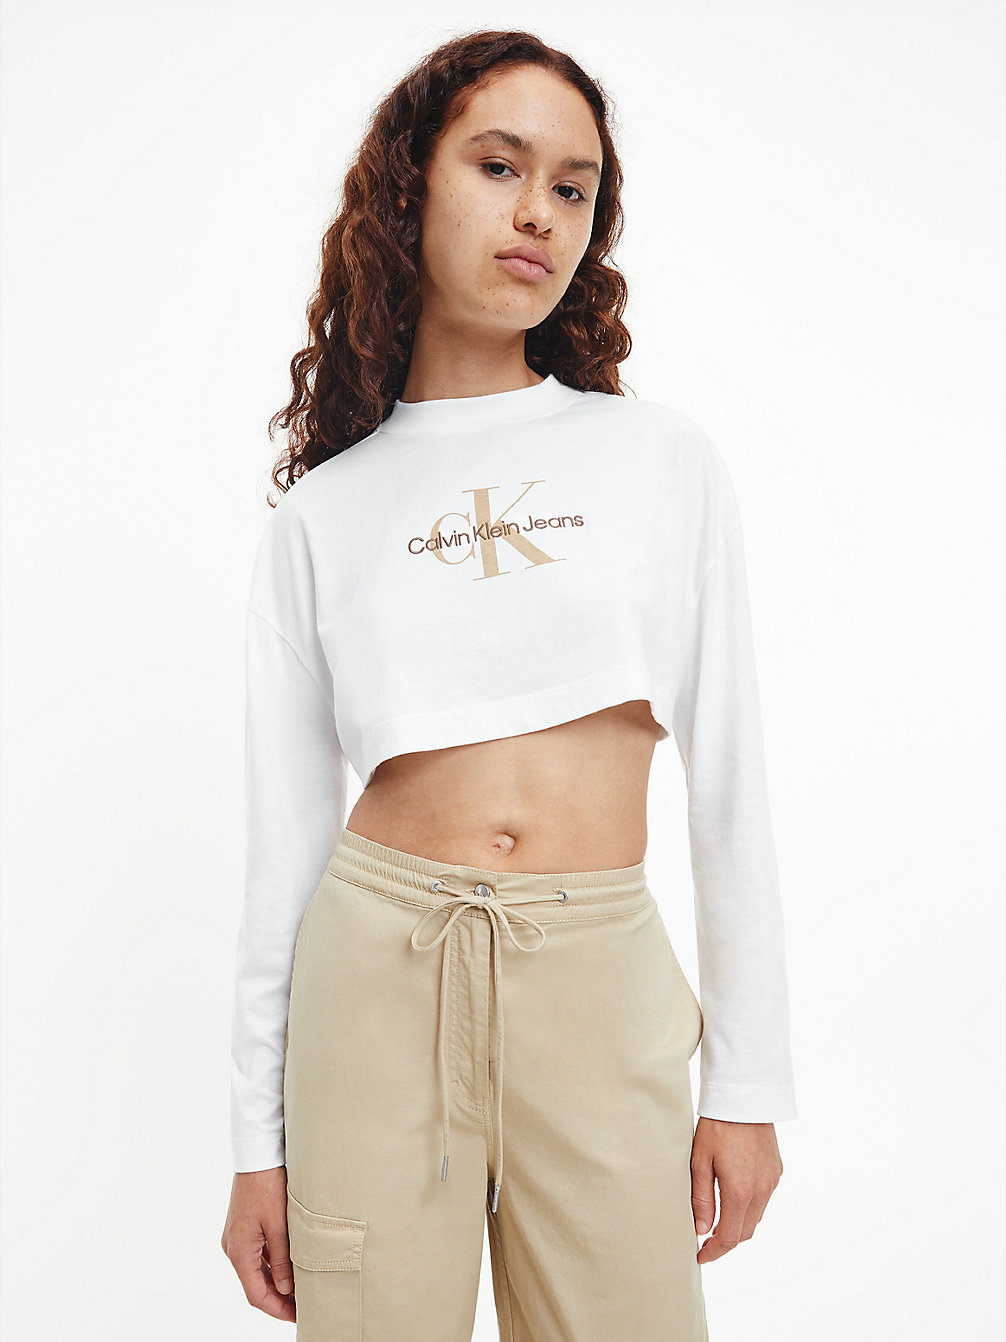 BRIGHT WHITE Cropped Long Sleeve Logo T-Shirt undefined women Calvin Klein